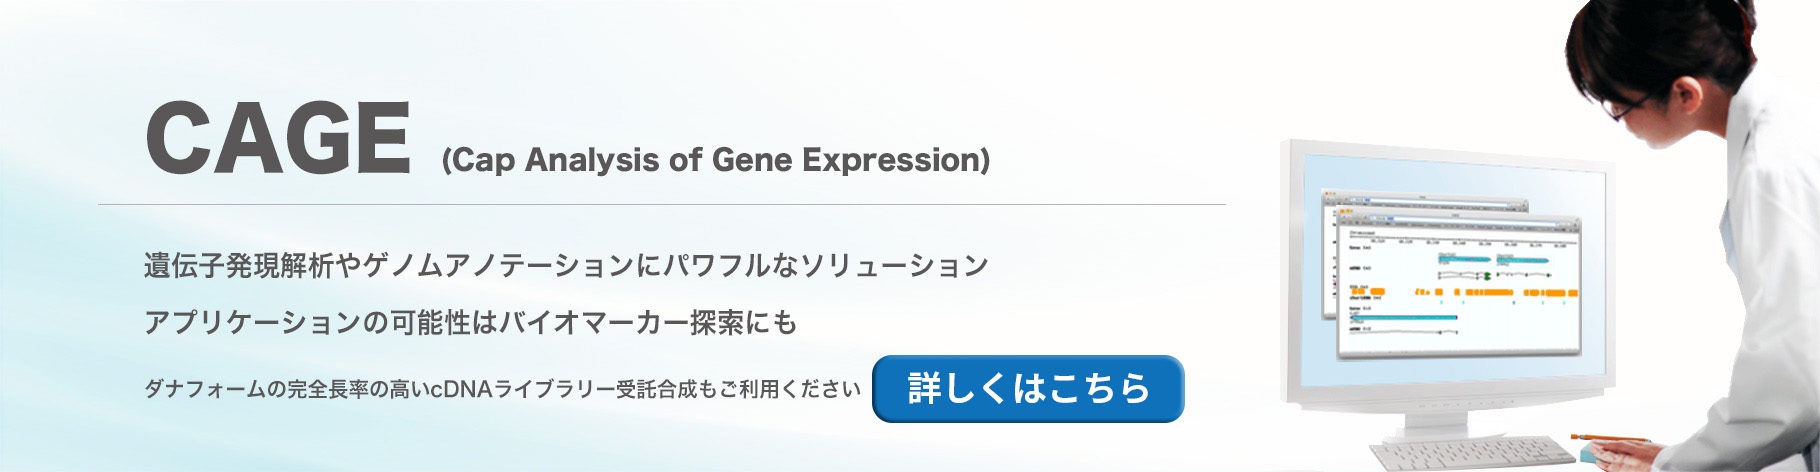 CAGE - Cap Analysis of Gene Expression